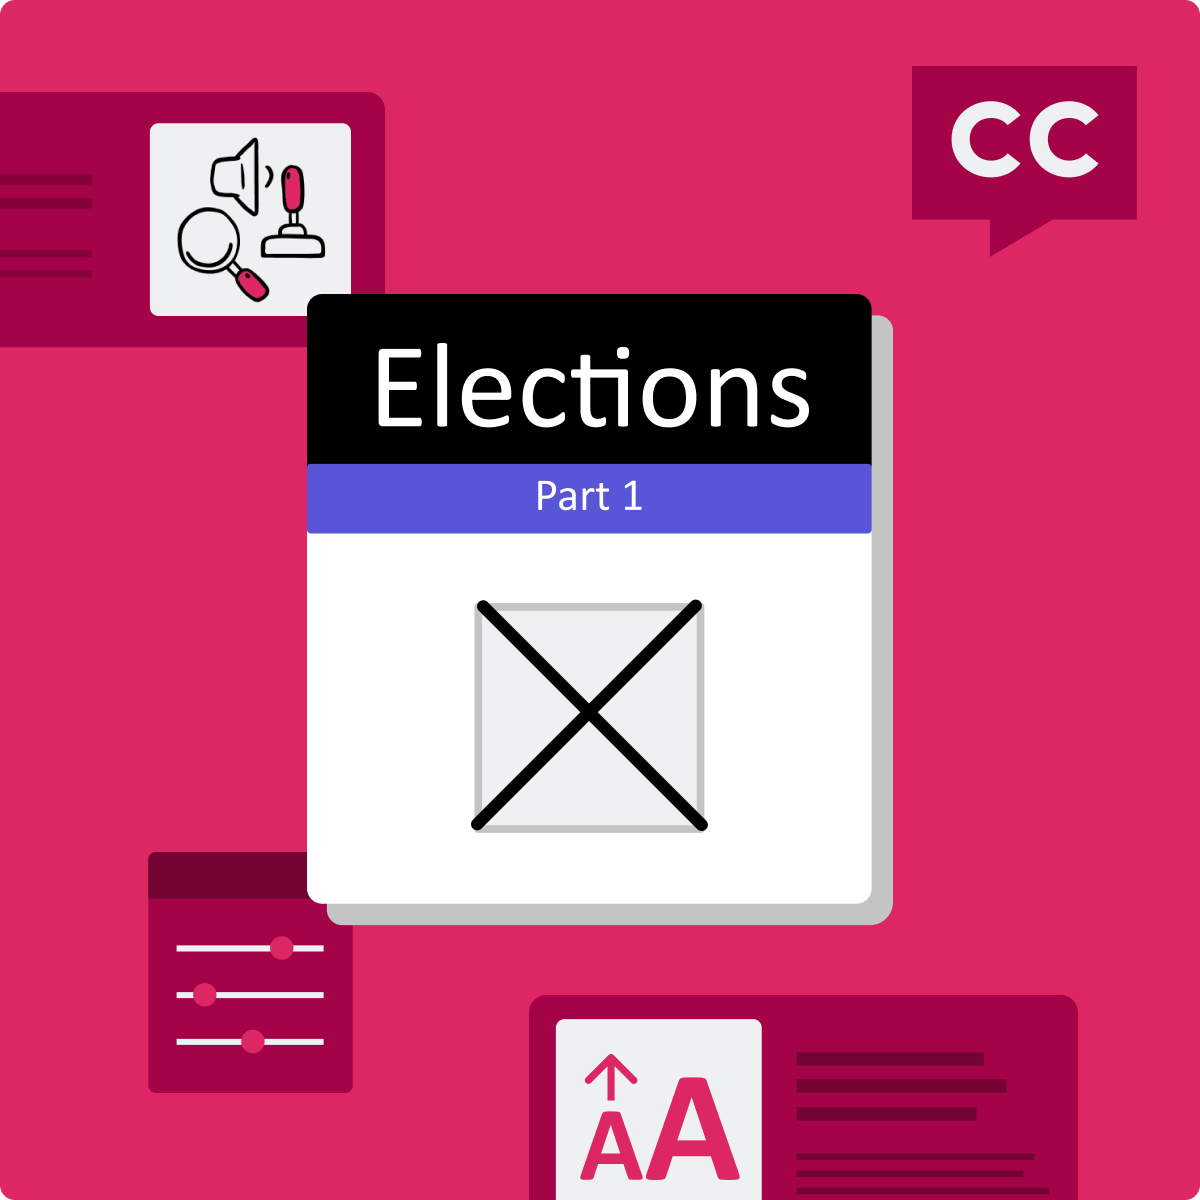 Decorative thumbnail image that says 'Elections Part 1' with illustrations of a checked off ballot checkbox, surrounded by smaller illustrations of accessibility features such as a closed captioning symbol, text resizing, and other assistive technologies